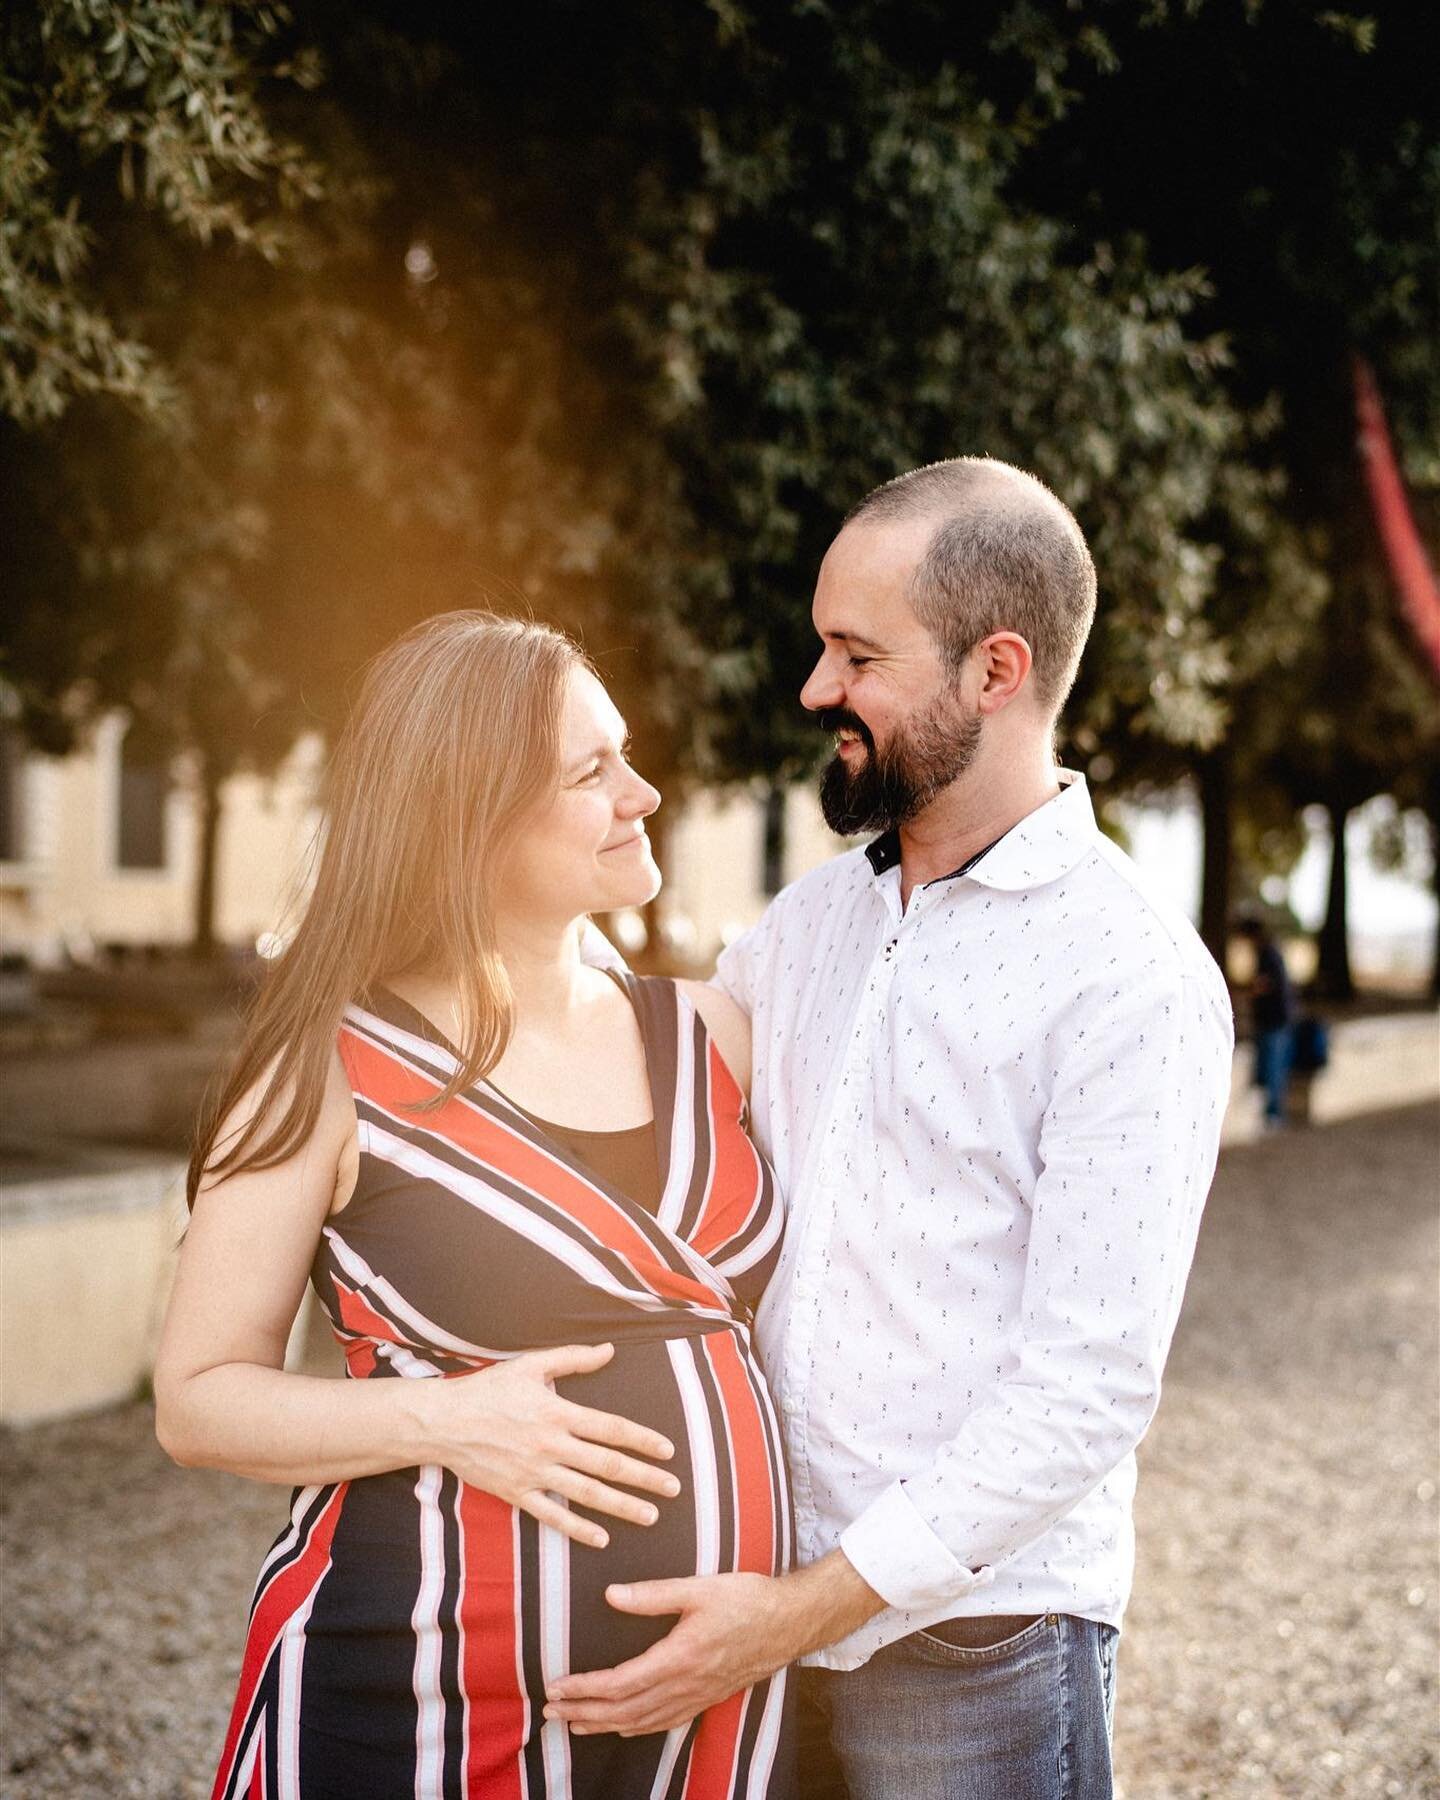 A couple photoshoot in Rome was on my wishlist for so long. Grazie mille @marinadepaula_facilitadora &amp; @gentilbreno for your trust. So happy to have been able to capture such a wonderful moment on your journey together!!☀️☺️❤️
.
.
.
#beautifulpla